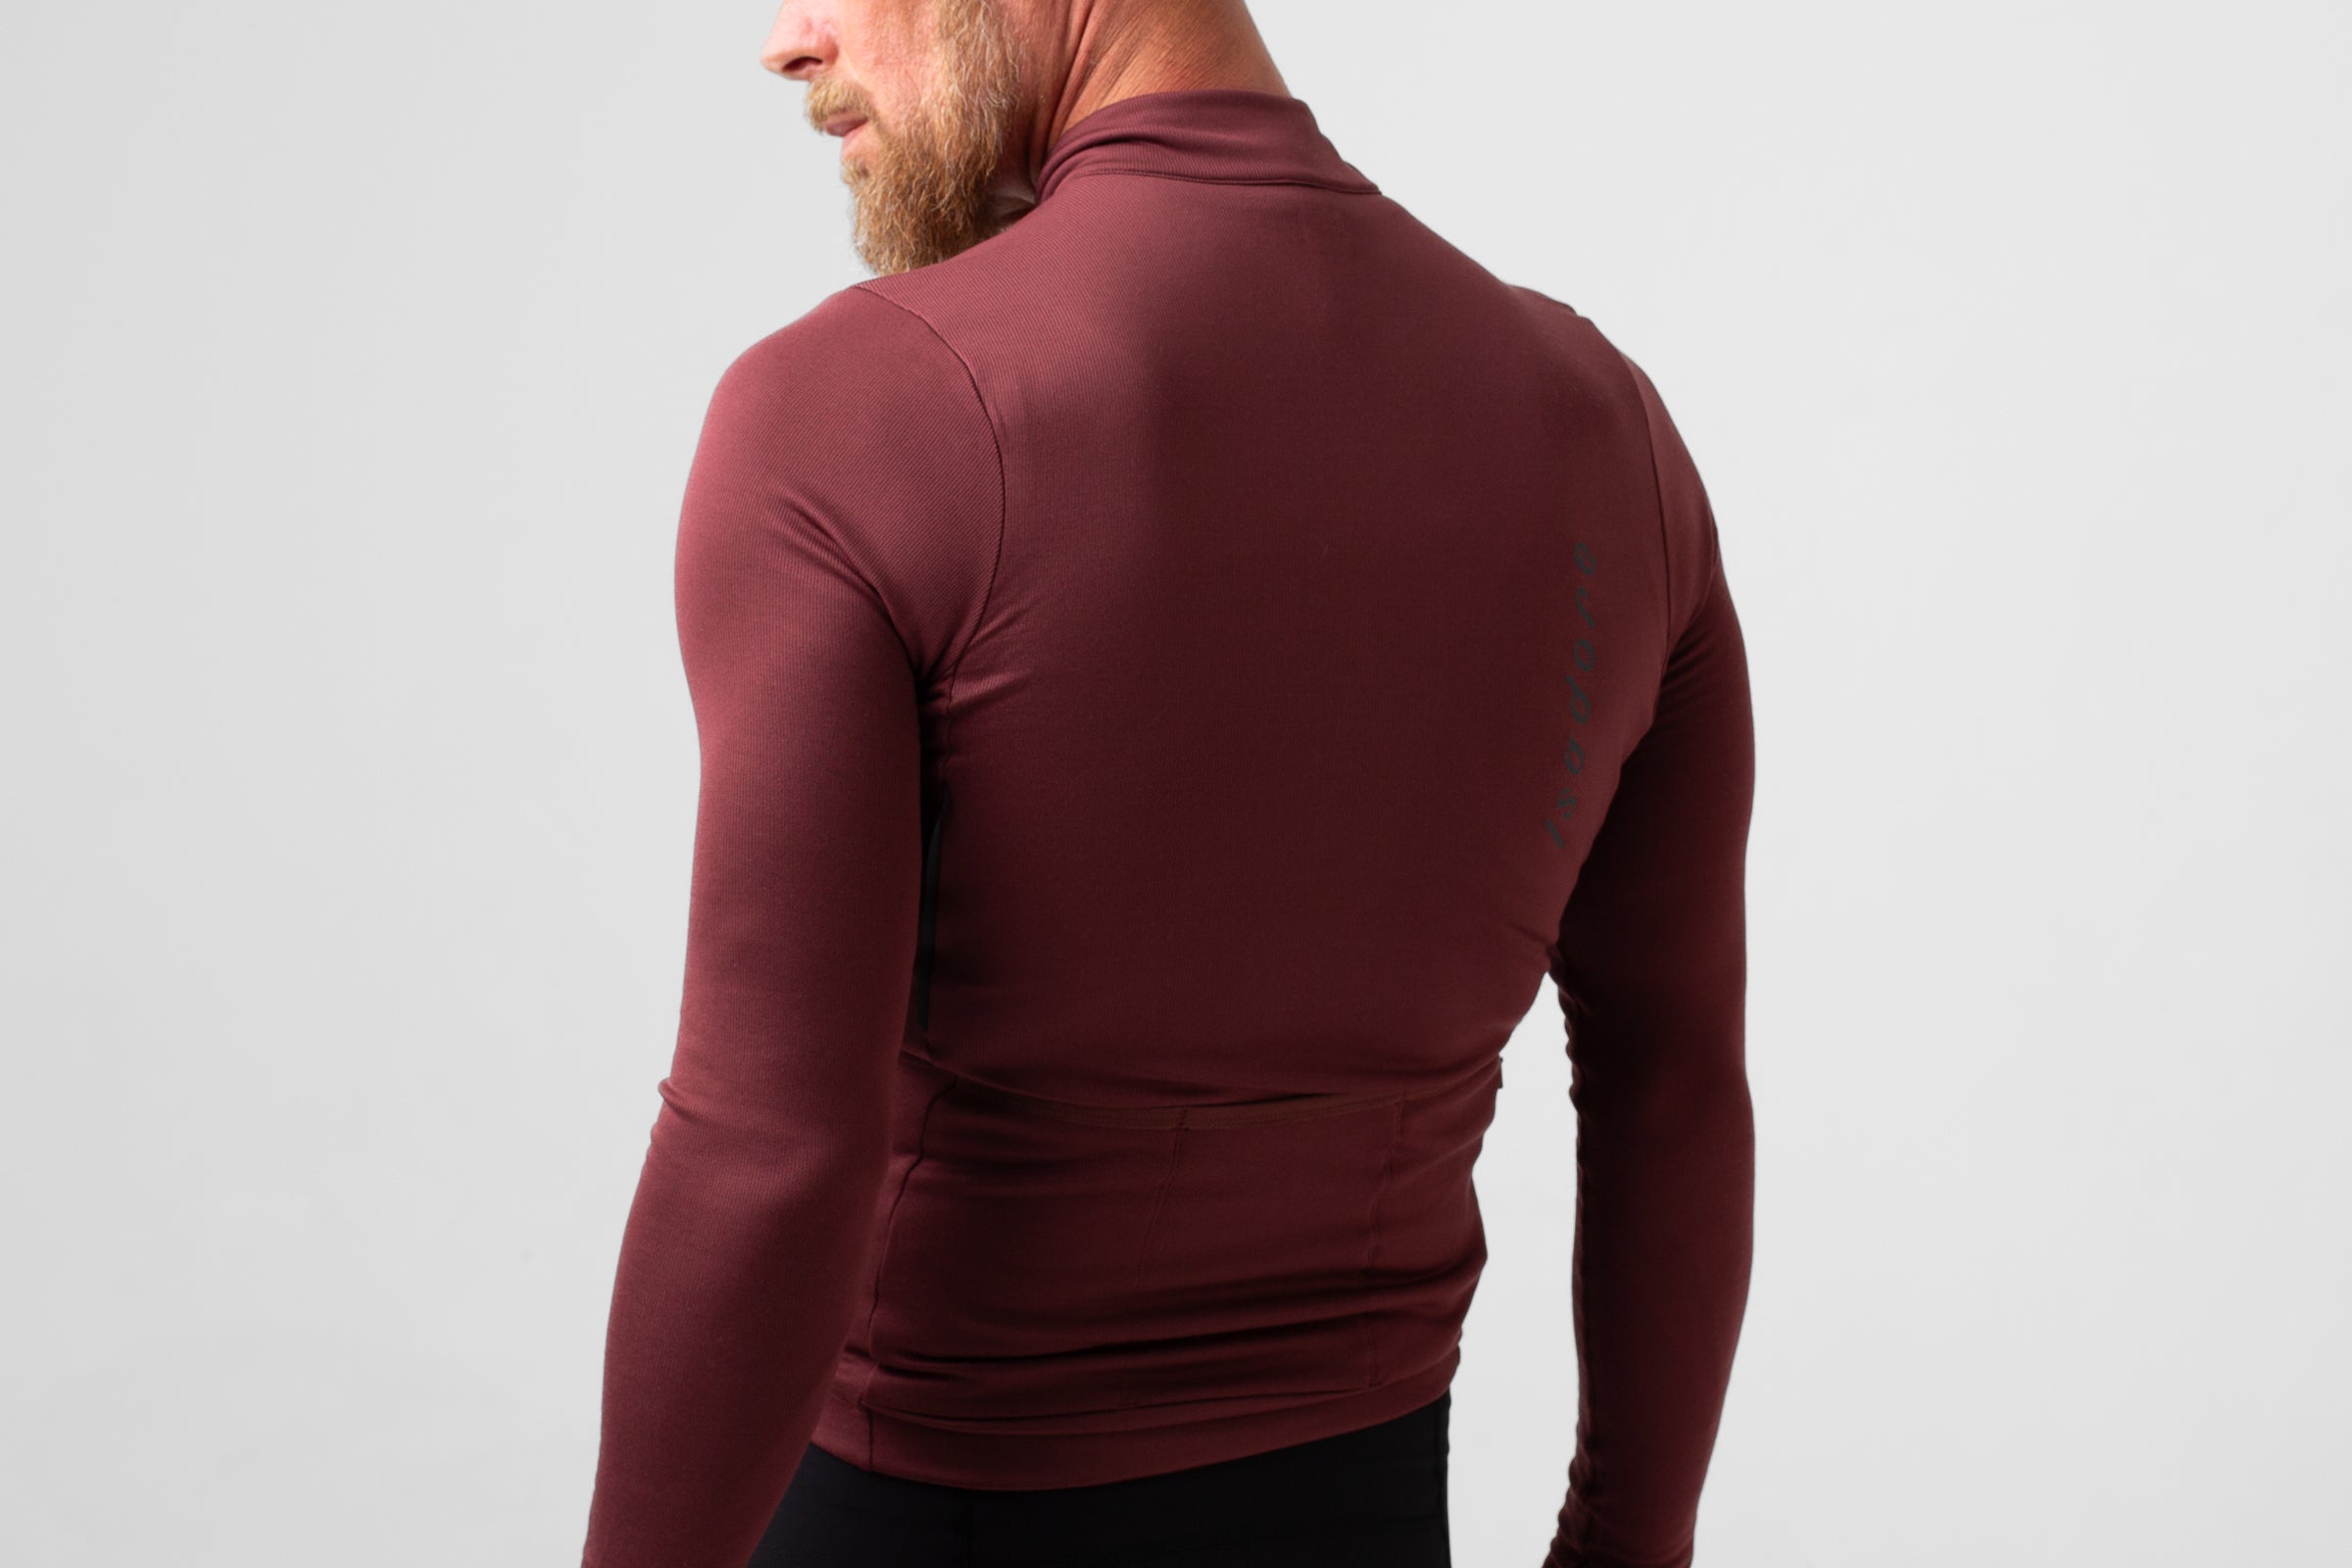 Signature Thermal Long Sleeve Jersey 2.0